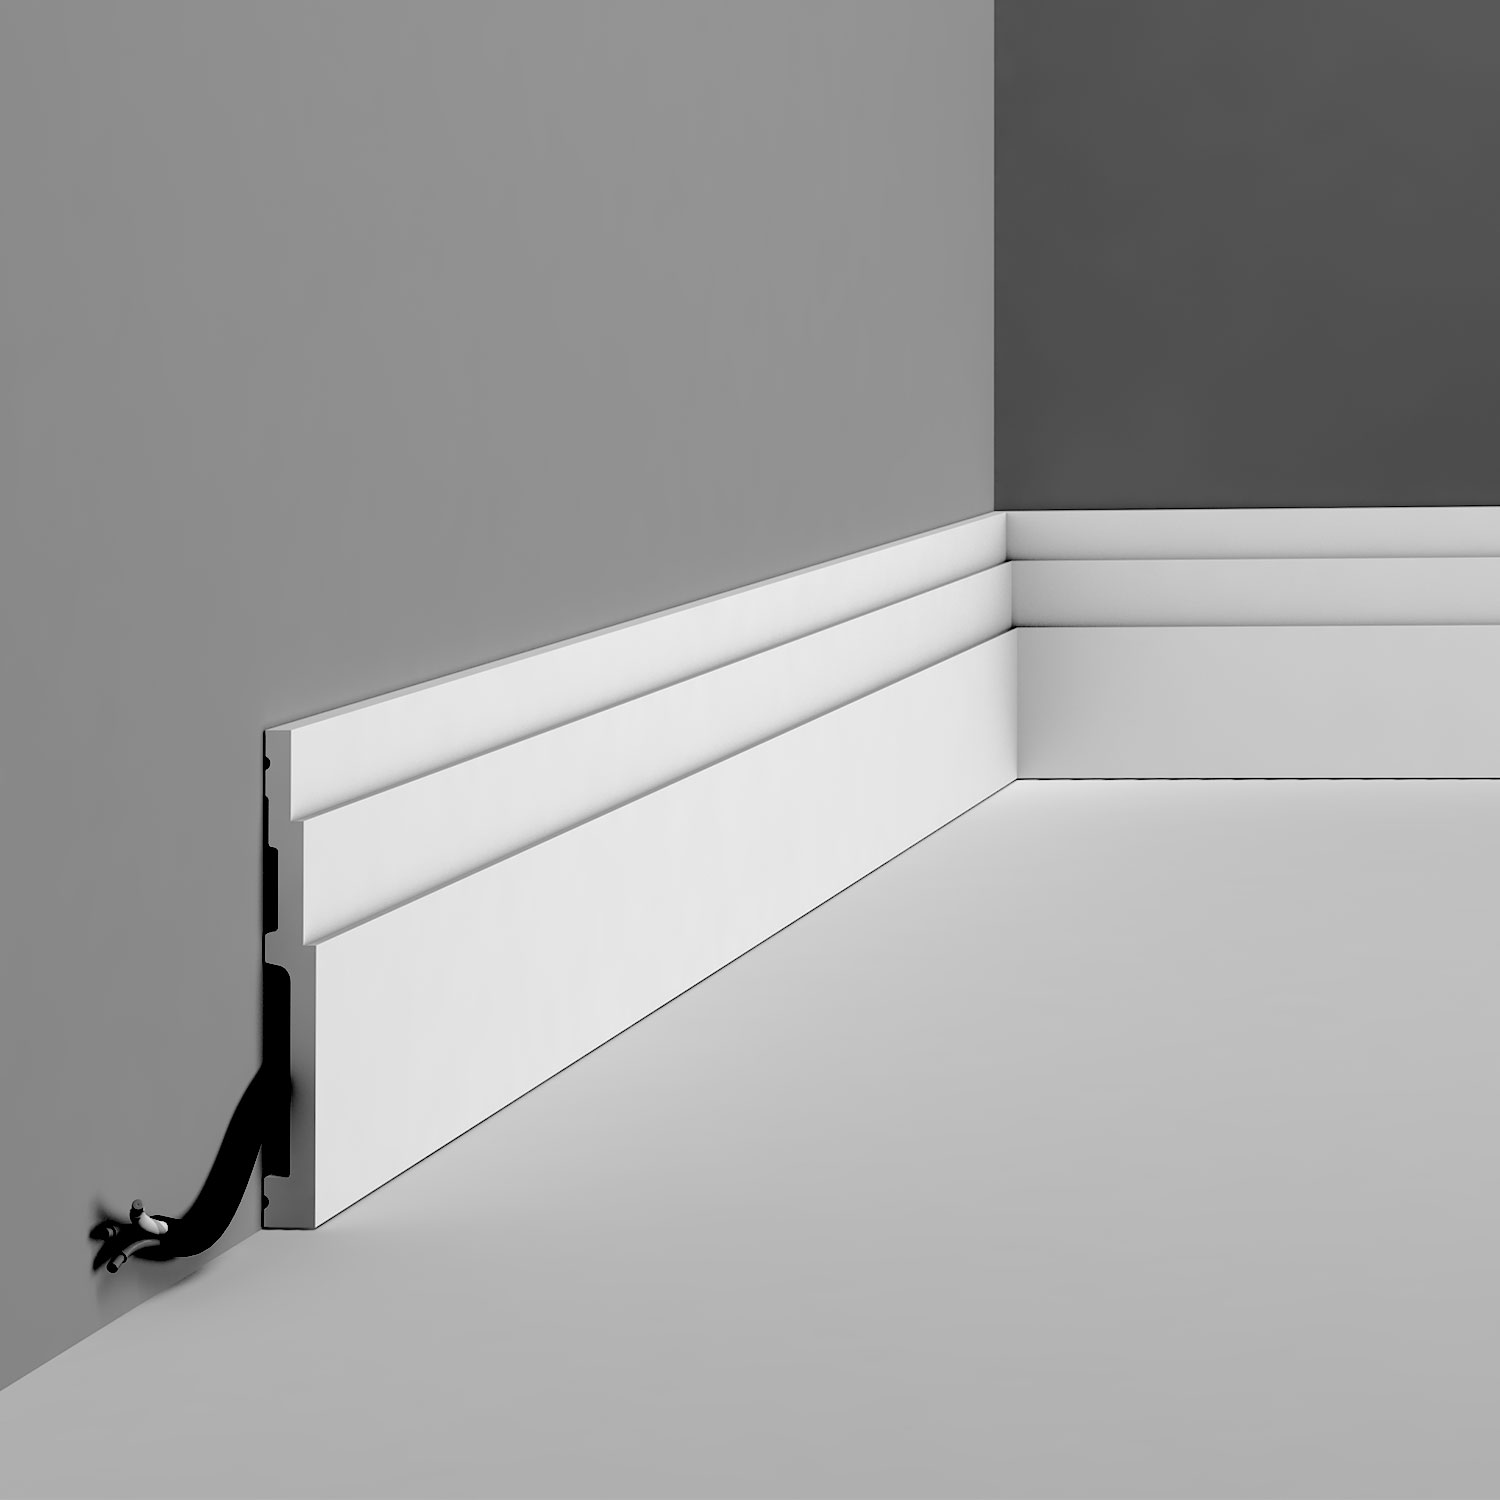 High Impact Polystyrene Panel/Chair Rail/Wainscot Moulding Primed White Orac Decor 3-1/8 H x 6'6 Long PX102 5 Pack